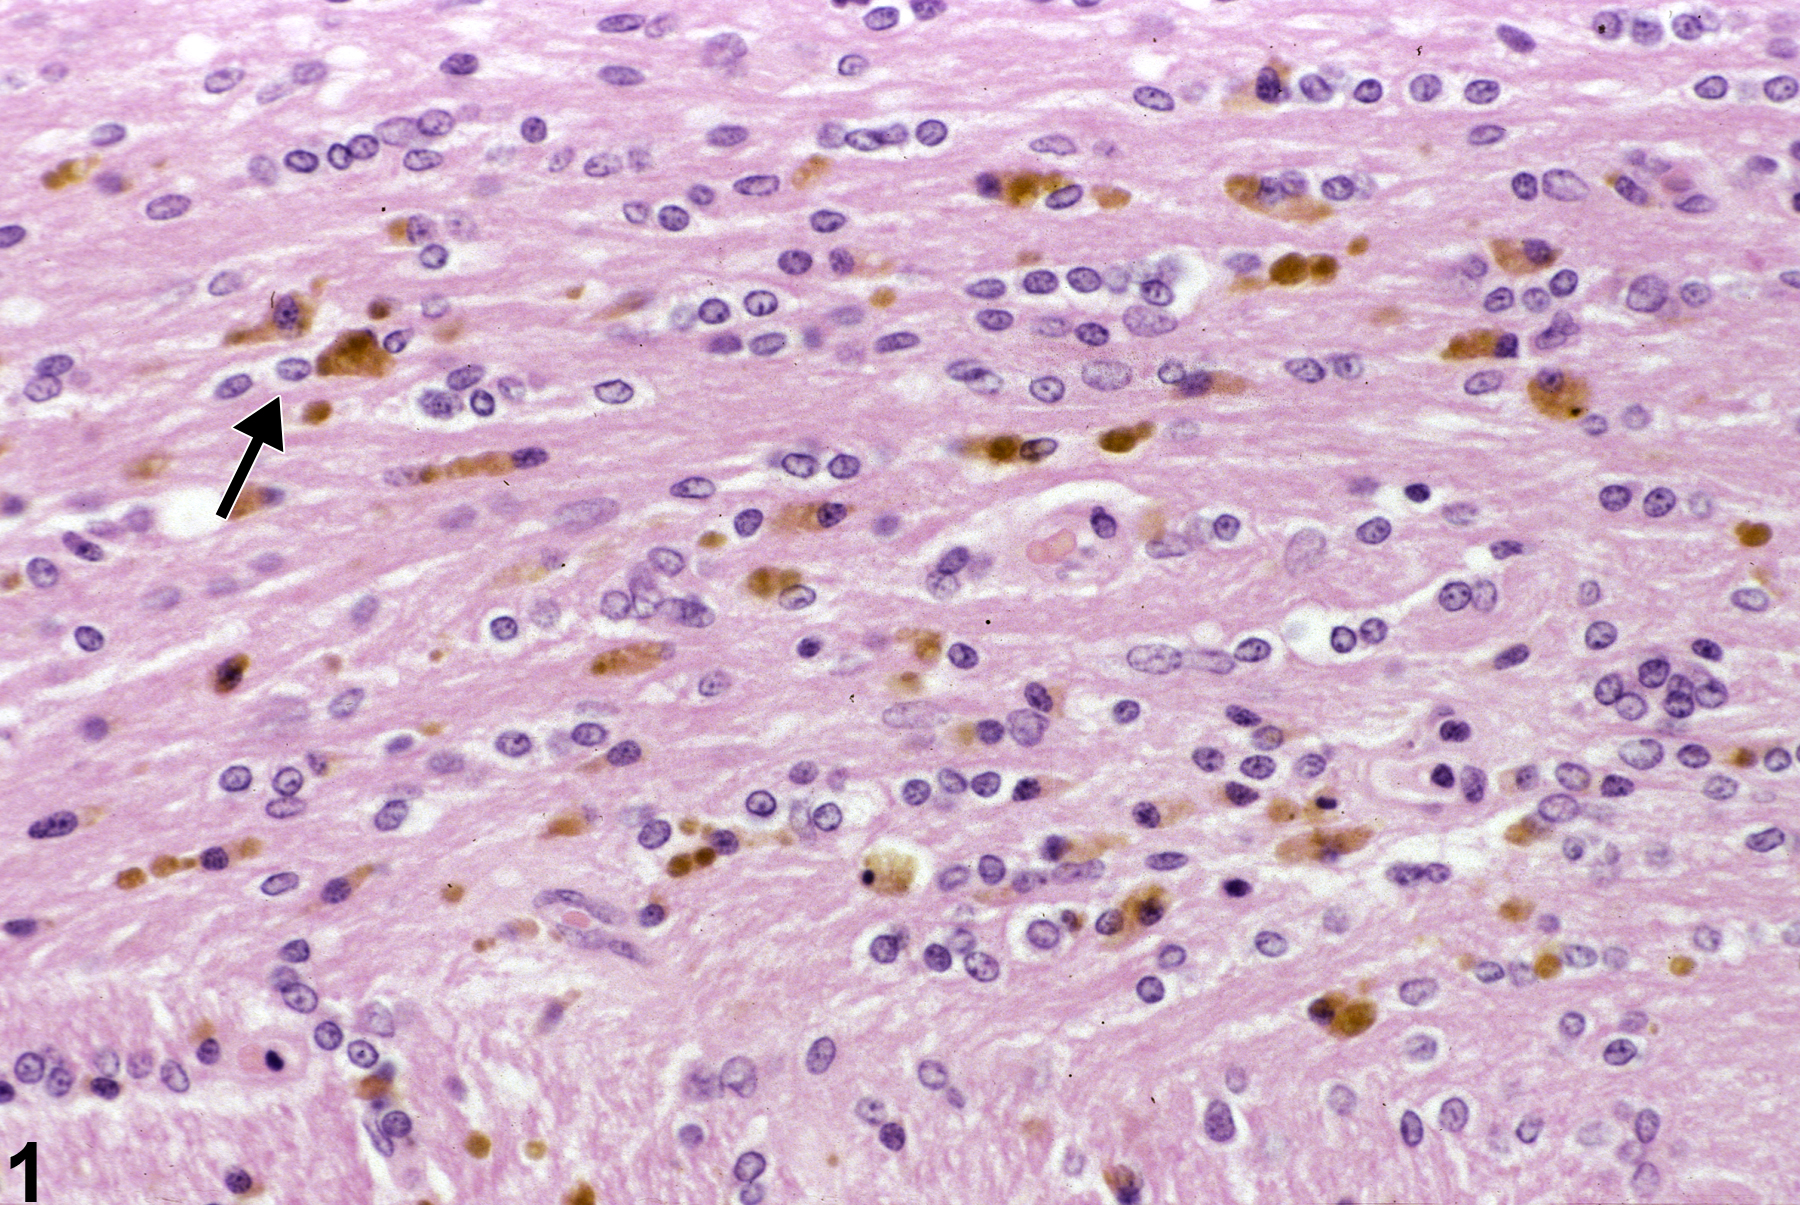 Image of pigment in the brain from a female F344/N rat in a chronic study